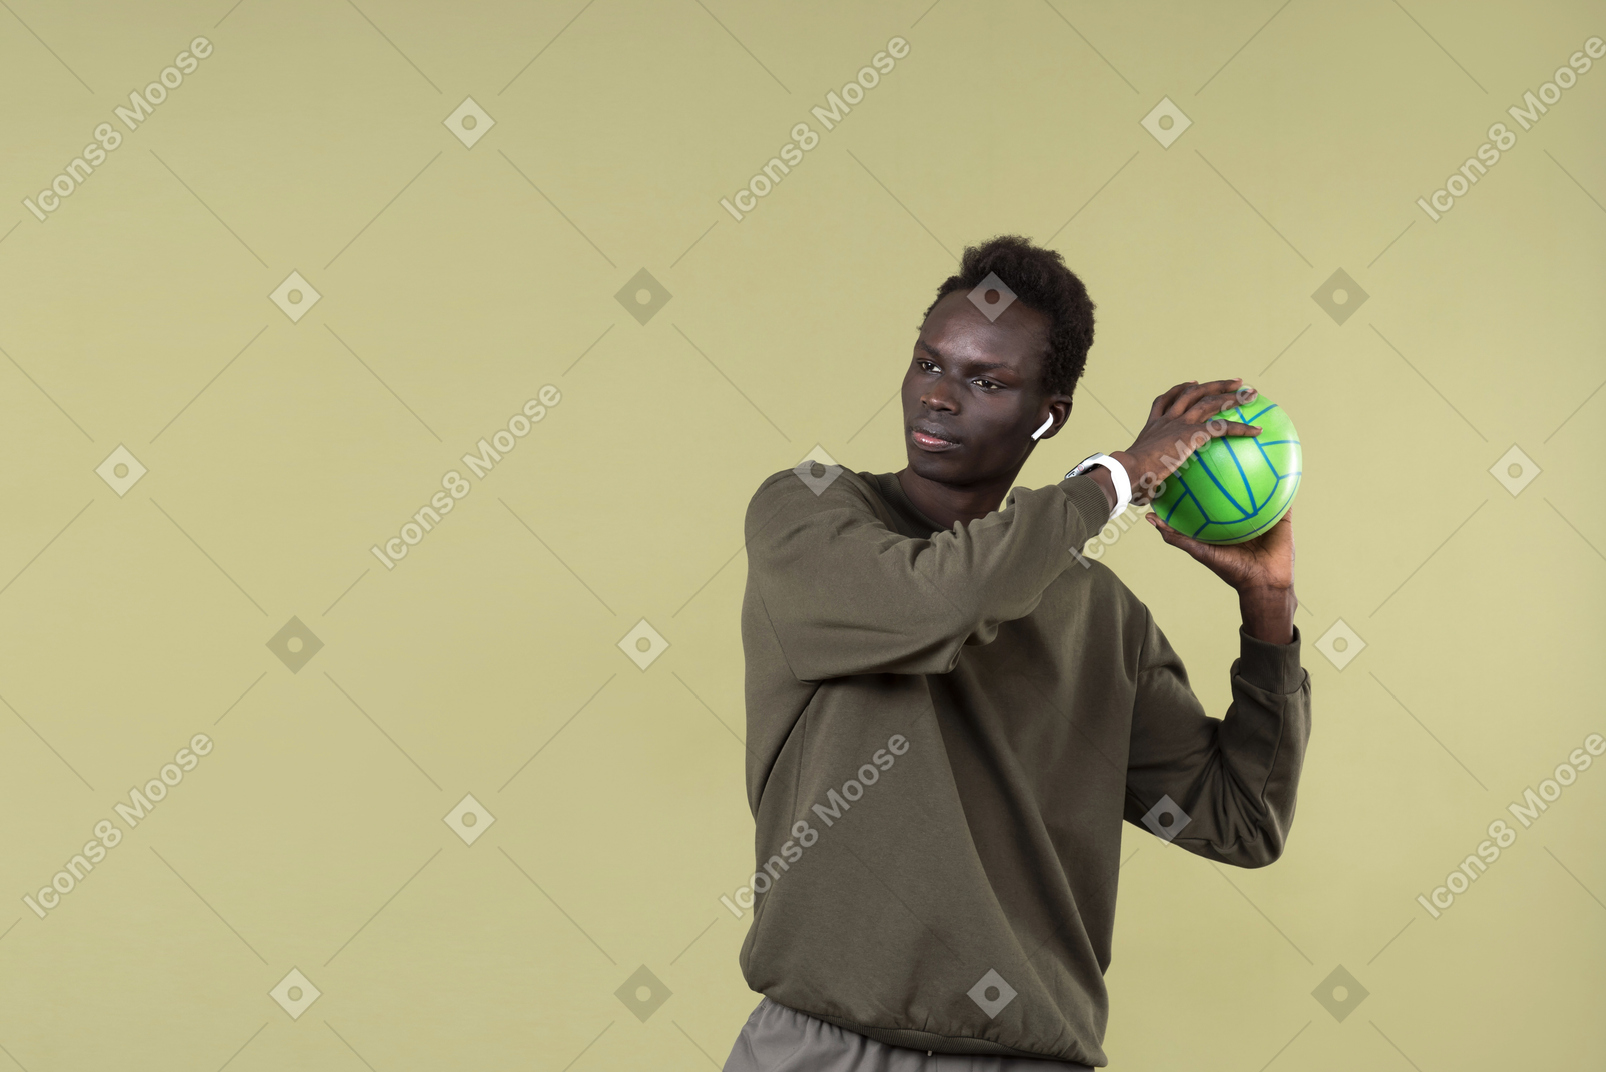 Young black man wearing casual clothes, with airpods and smartwatch on in the process of his workout